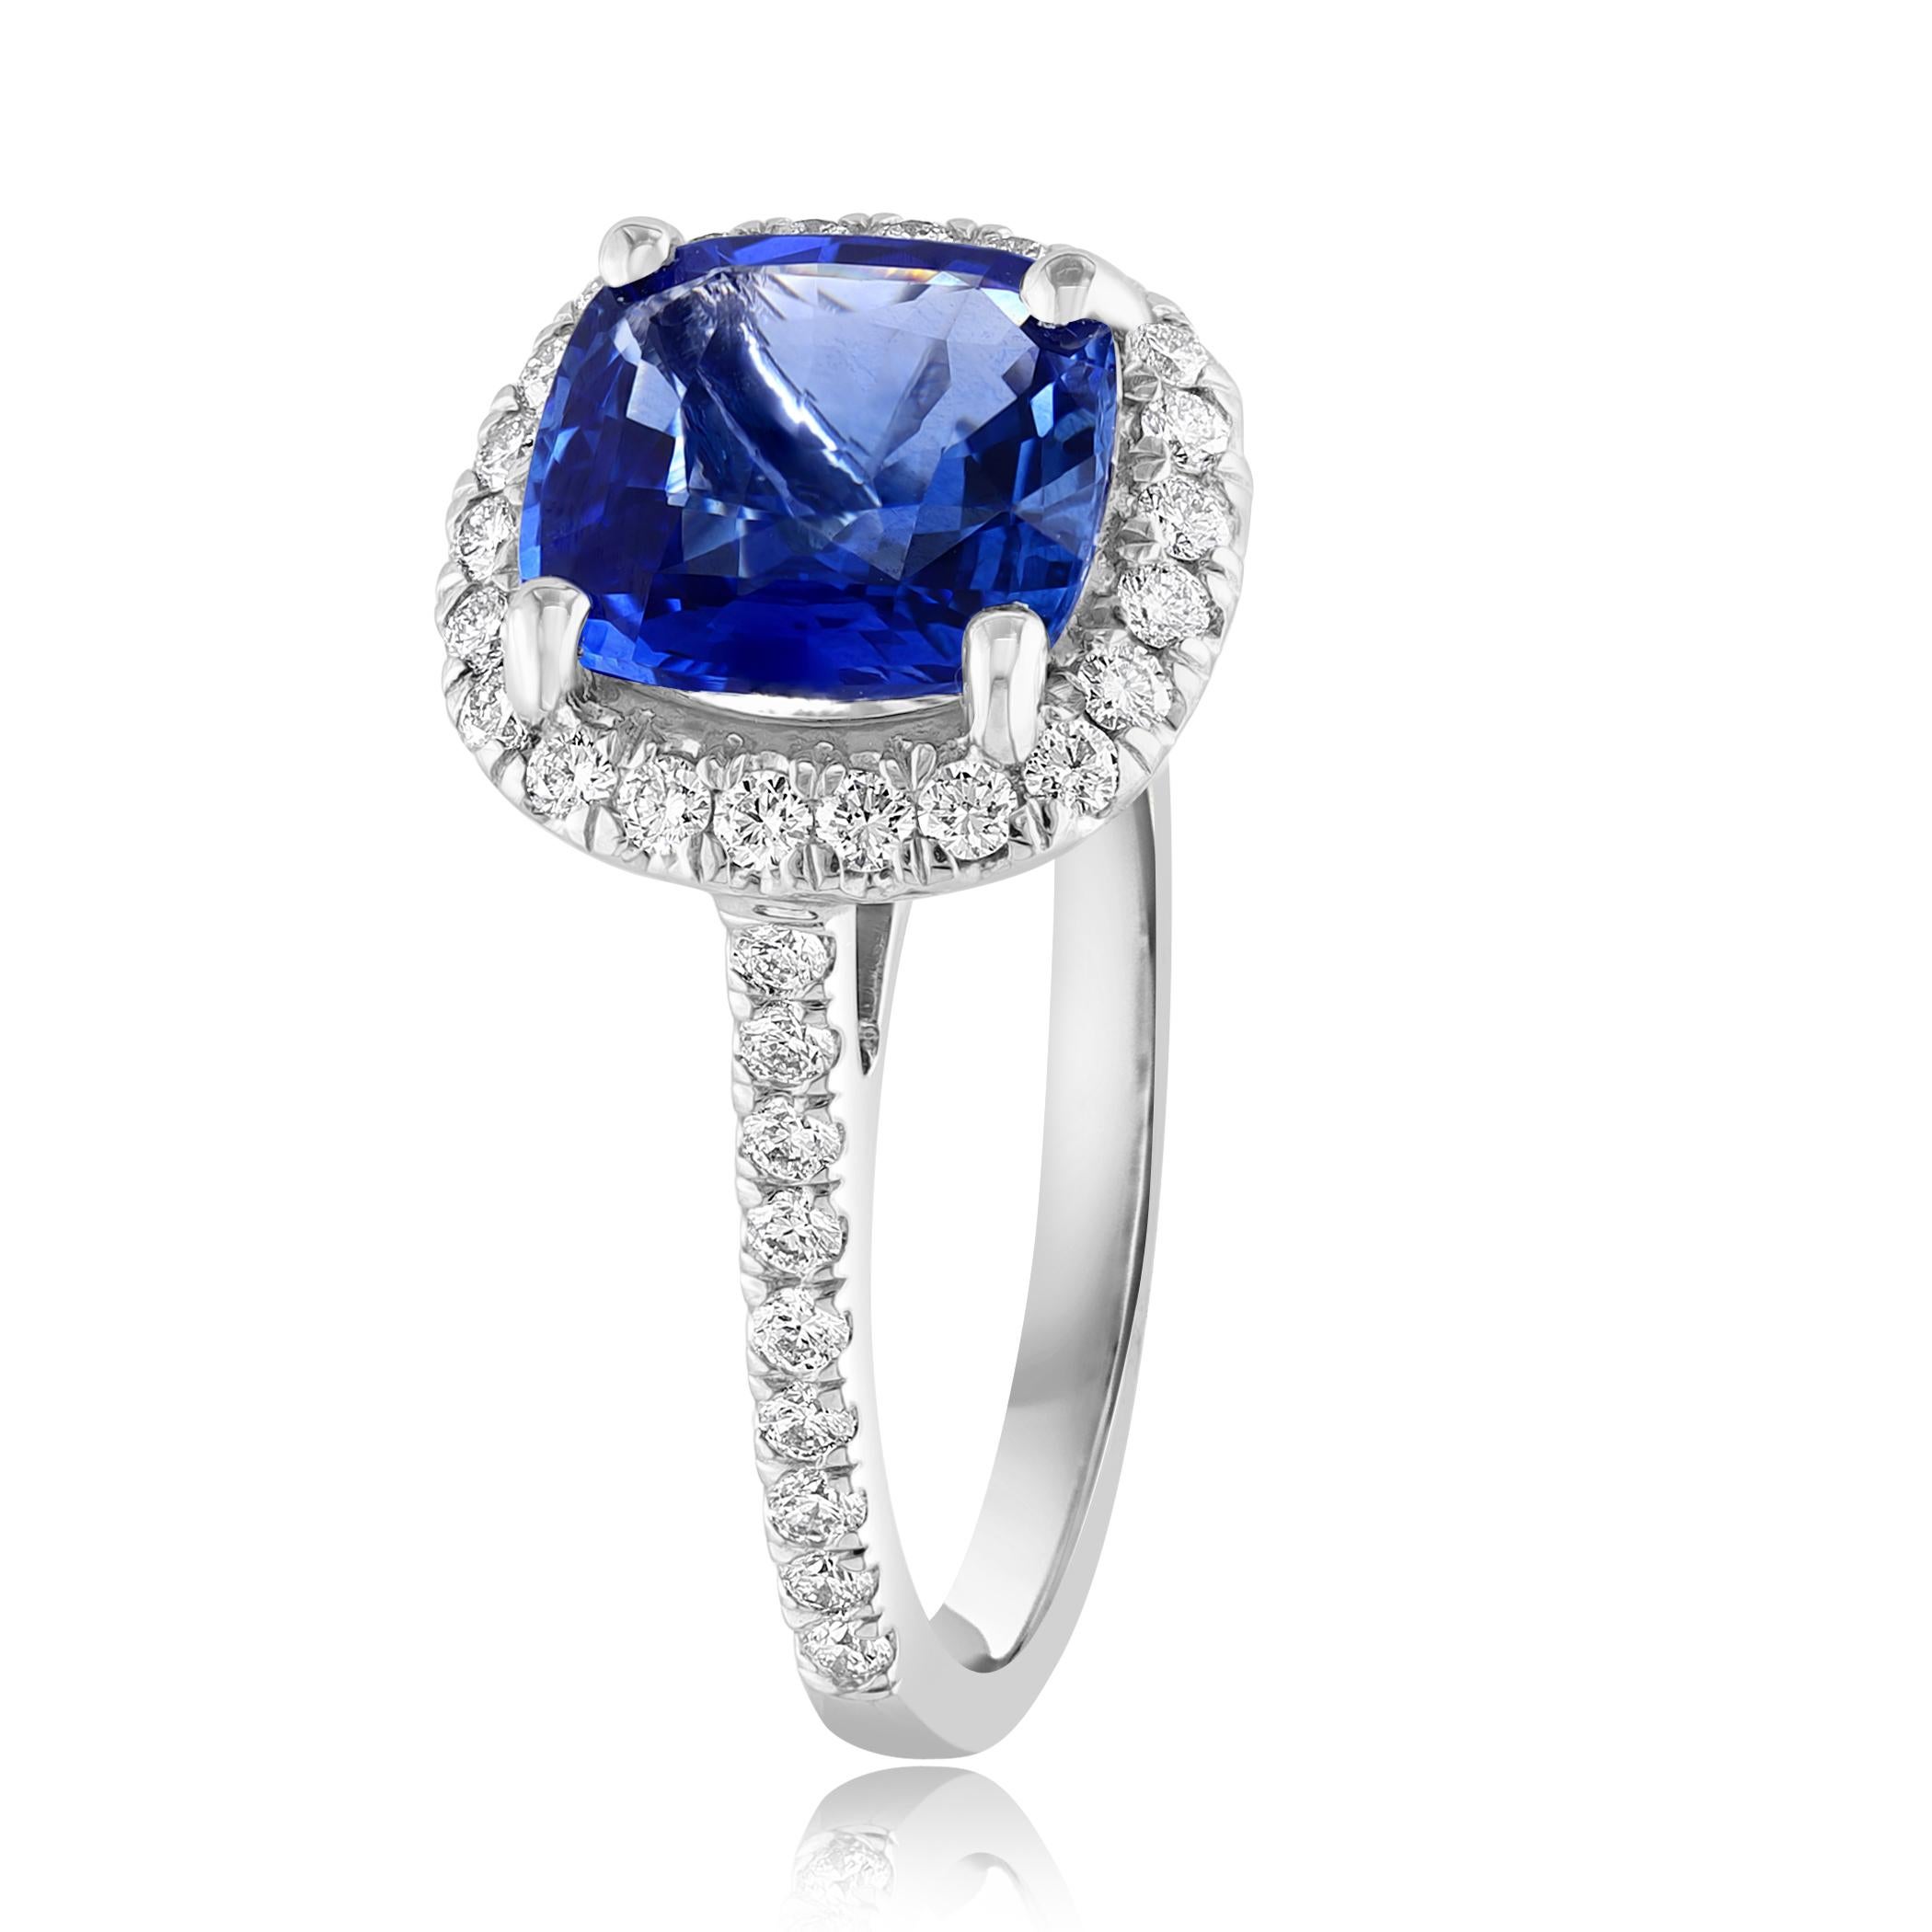 Oval Cut 3.07 Carat Cushion Cut Sapphire and Diamond Halo Ring in Platinum For Sale